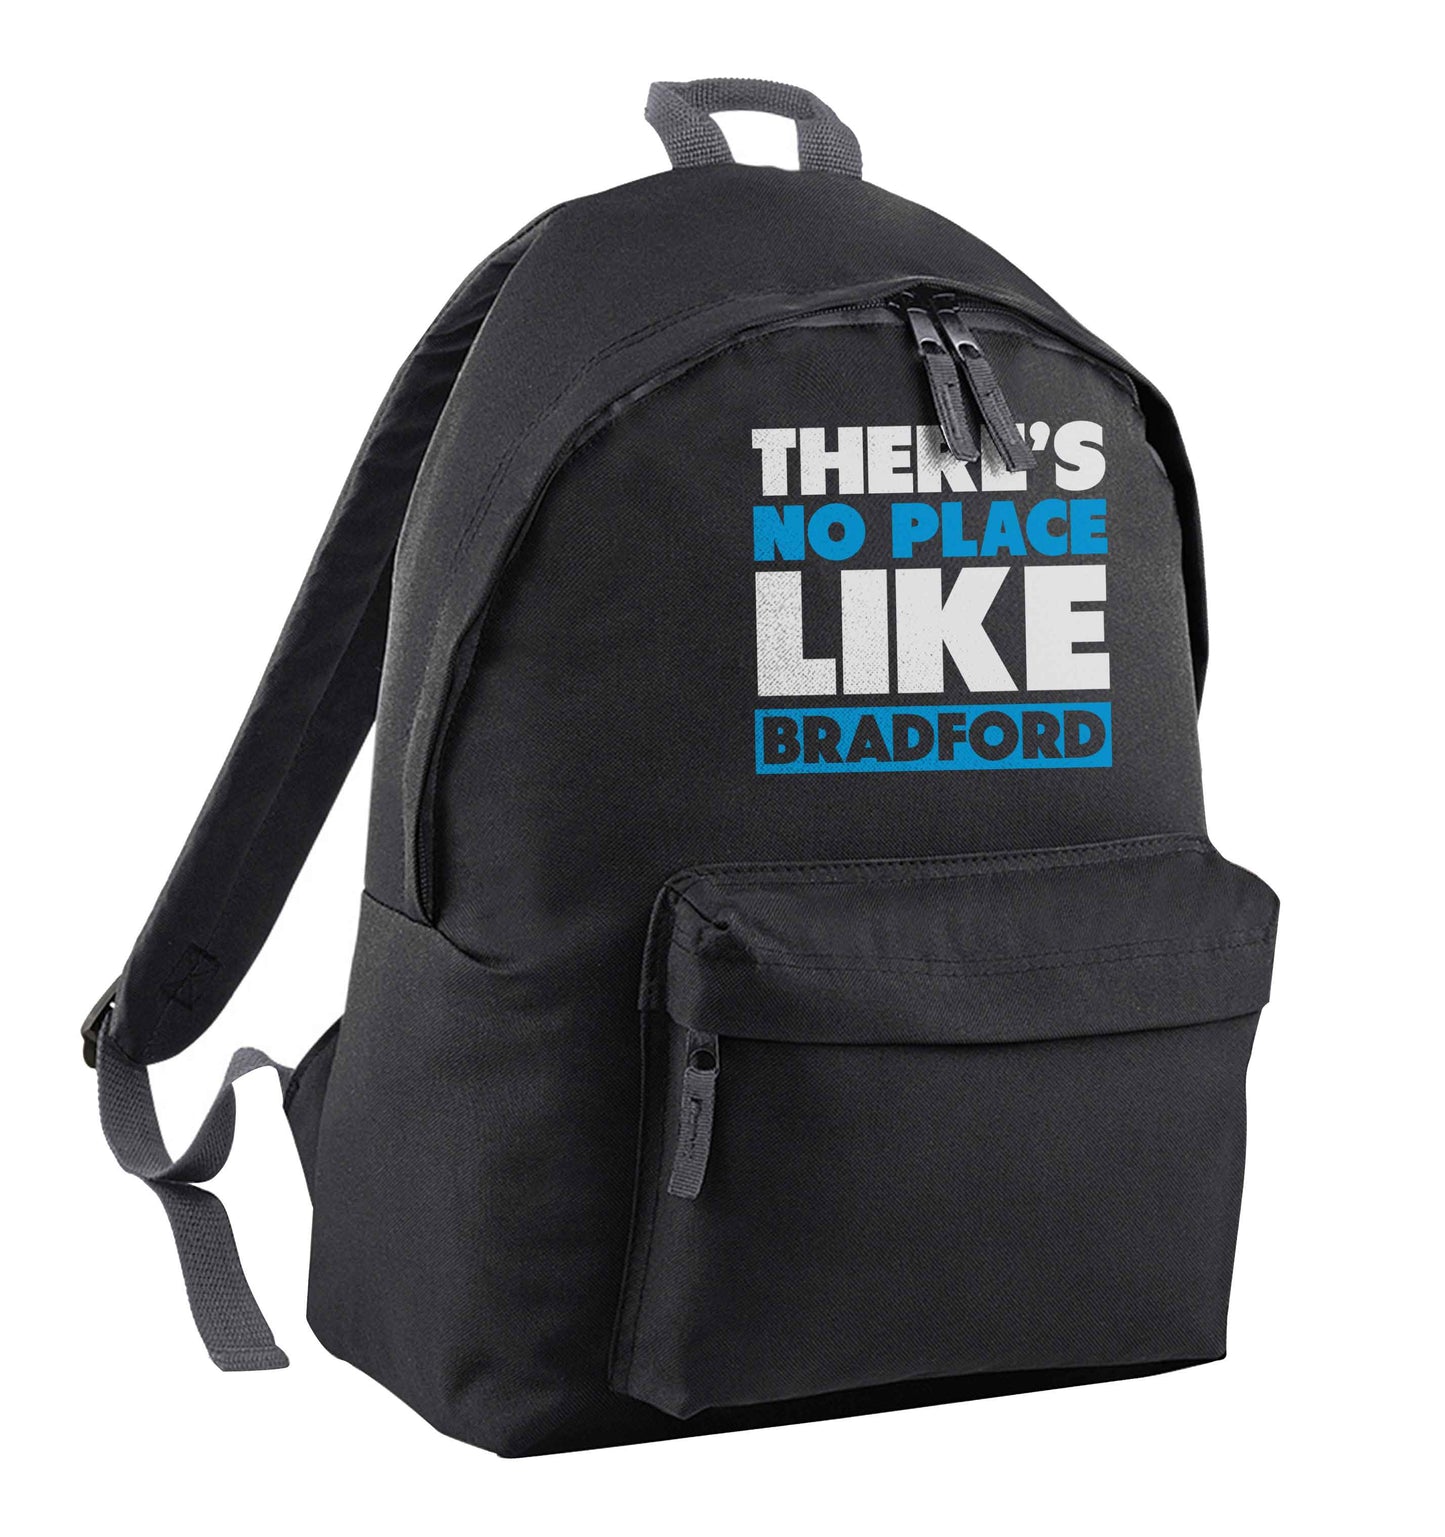 There's no place like Bradford black adults backpack